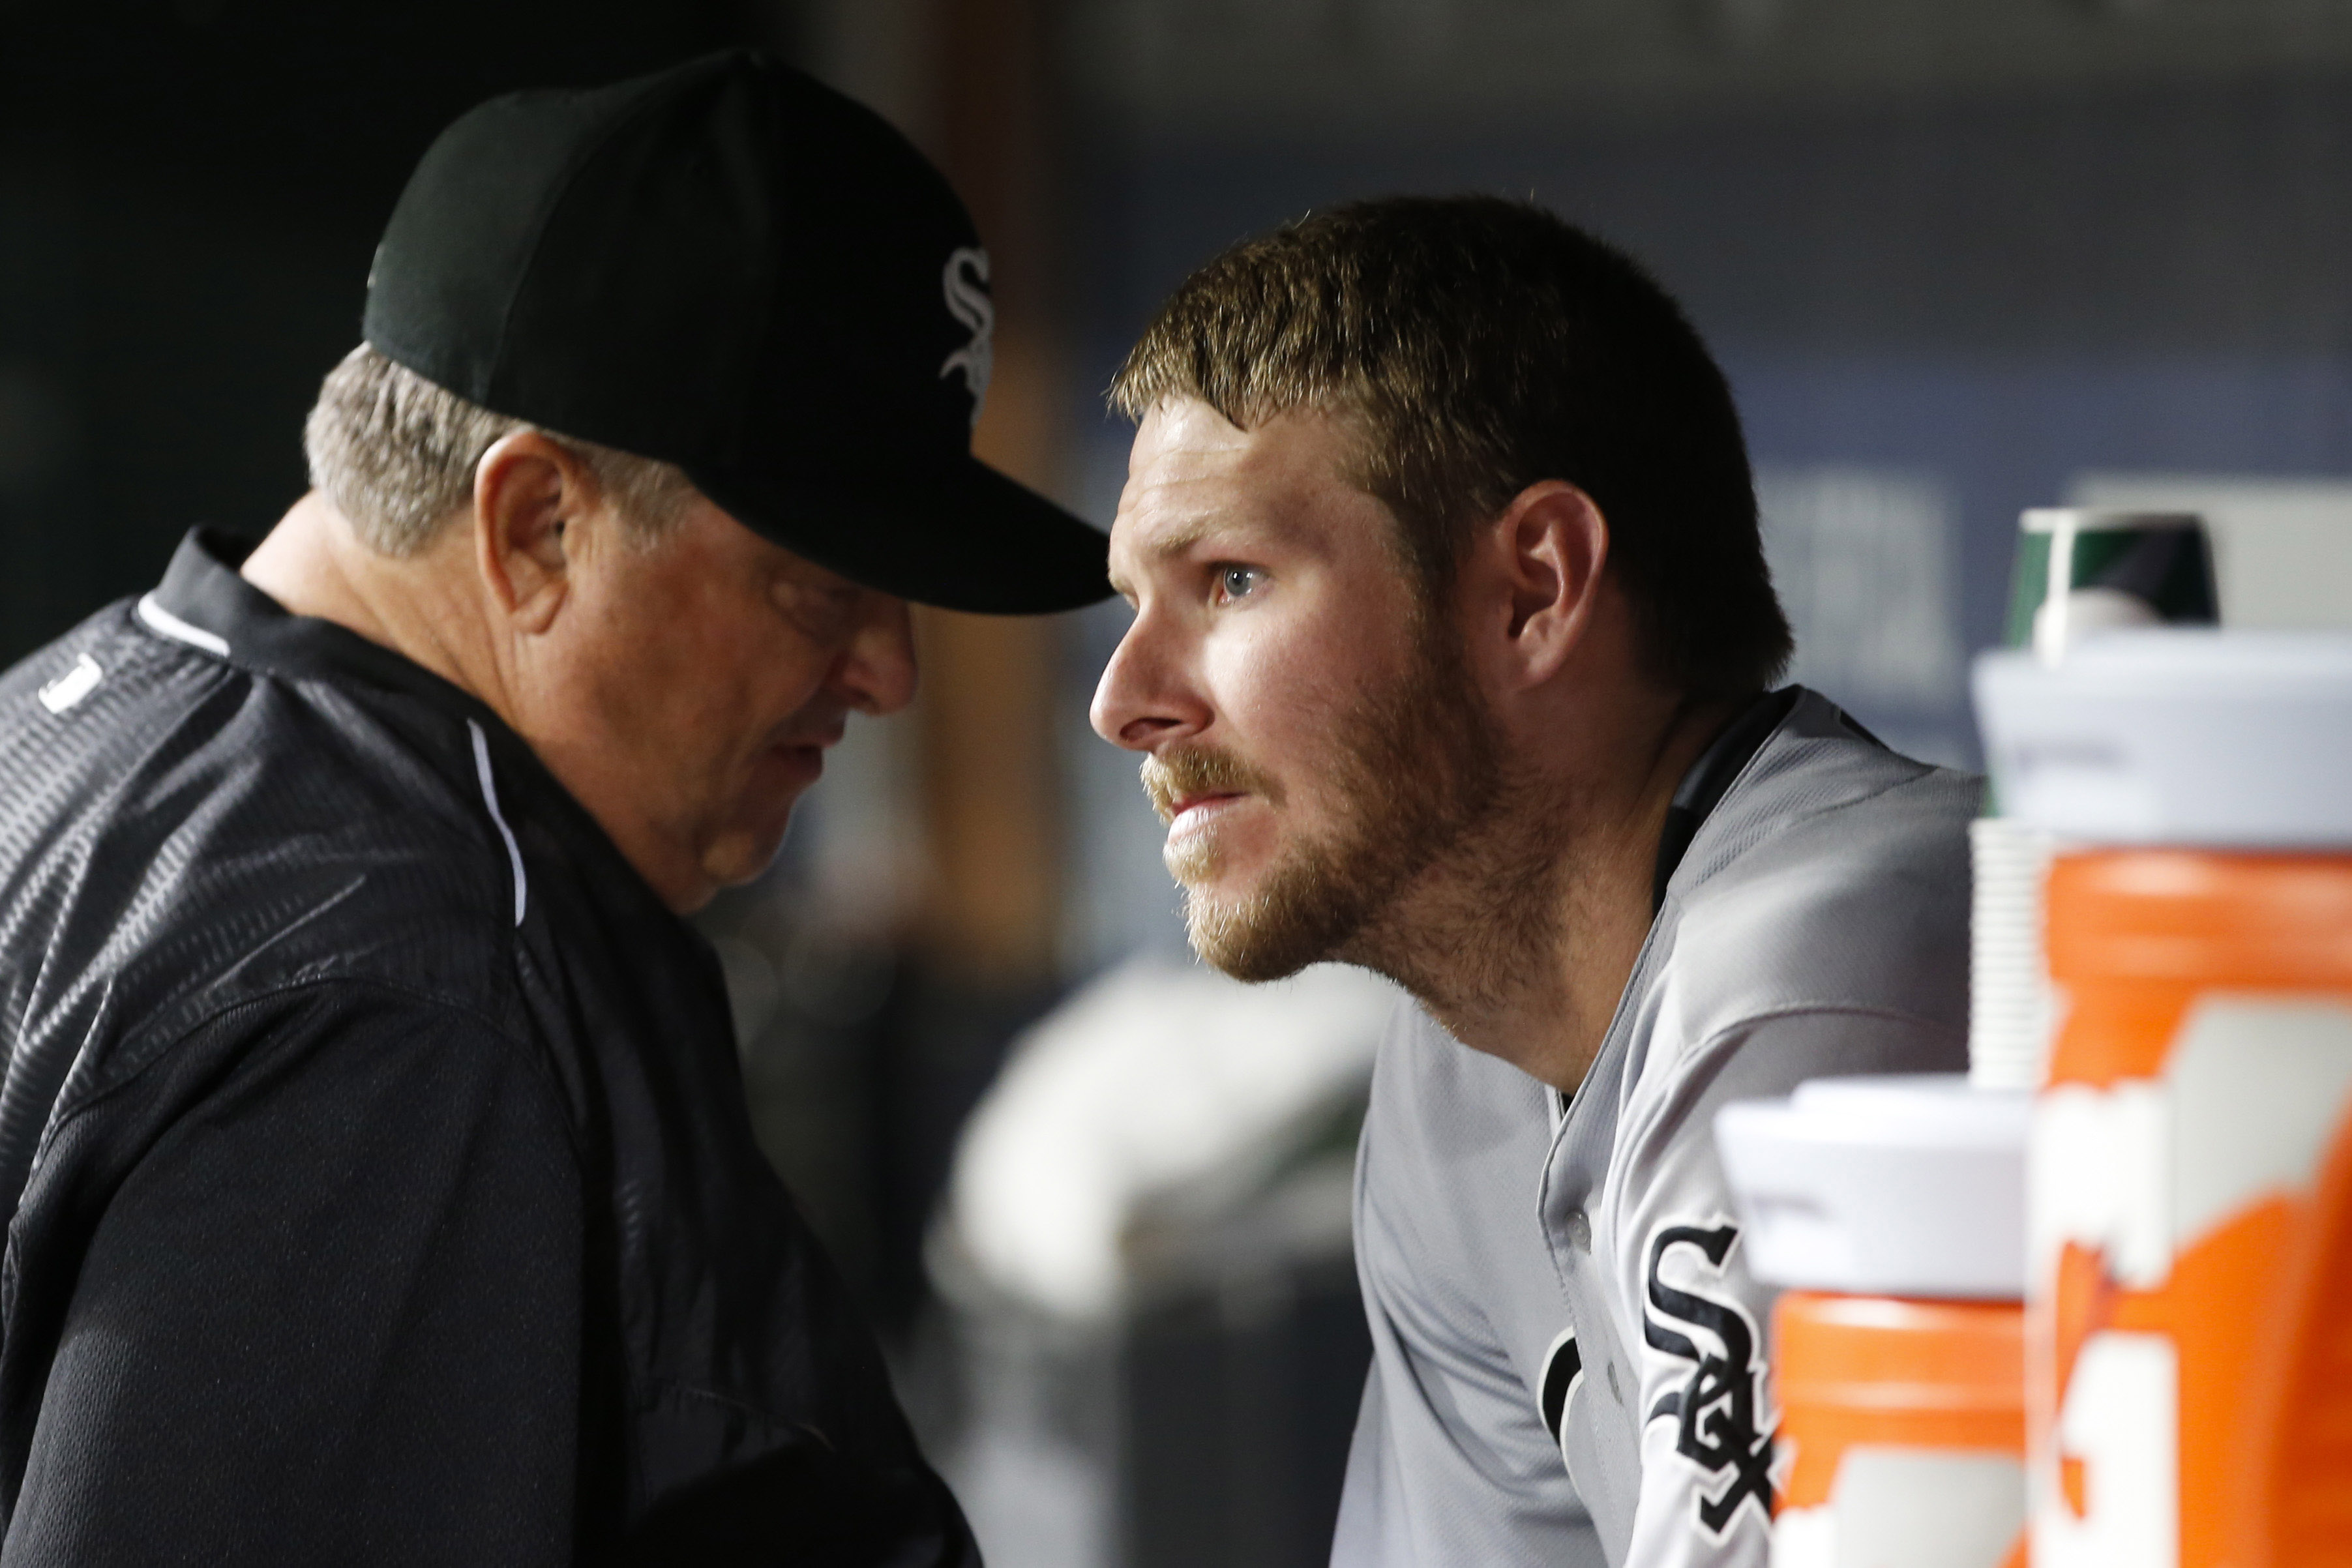 White Sox send Chris Sale home for 'clubhouse incident